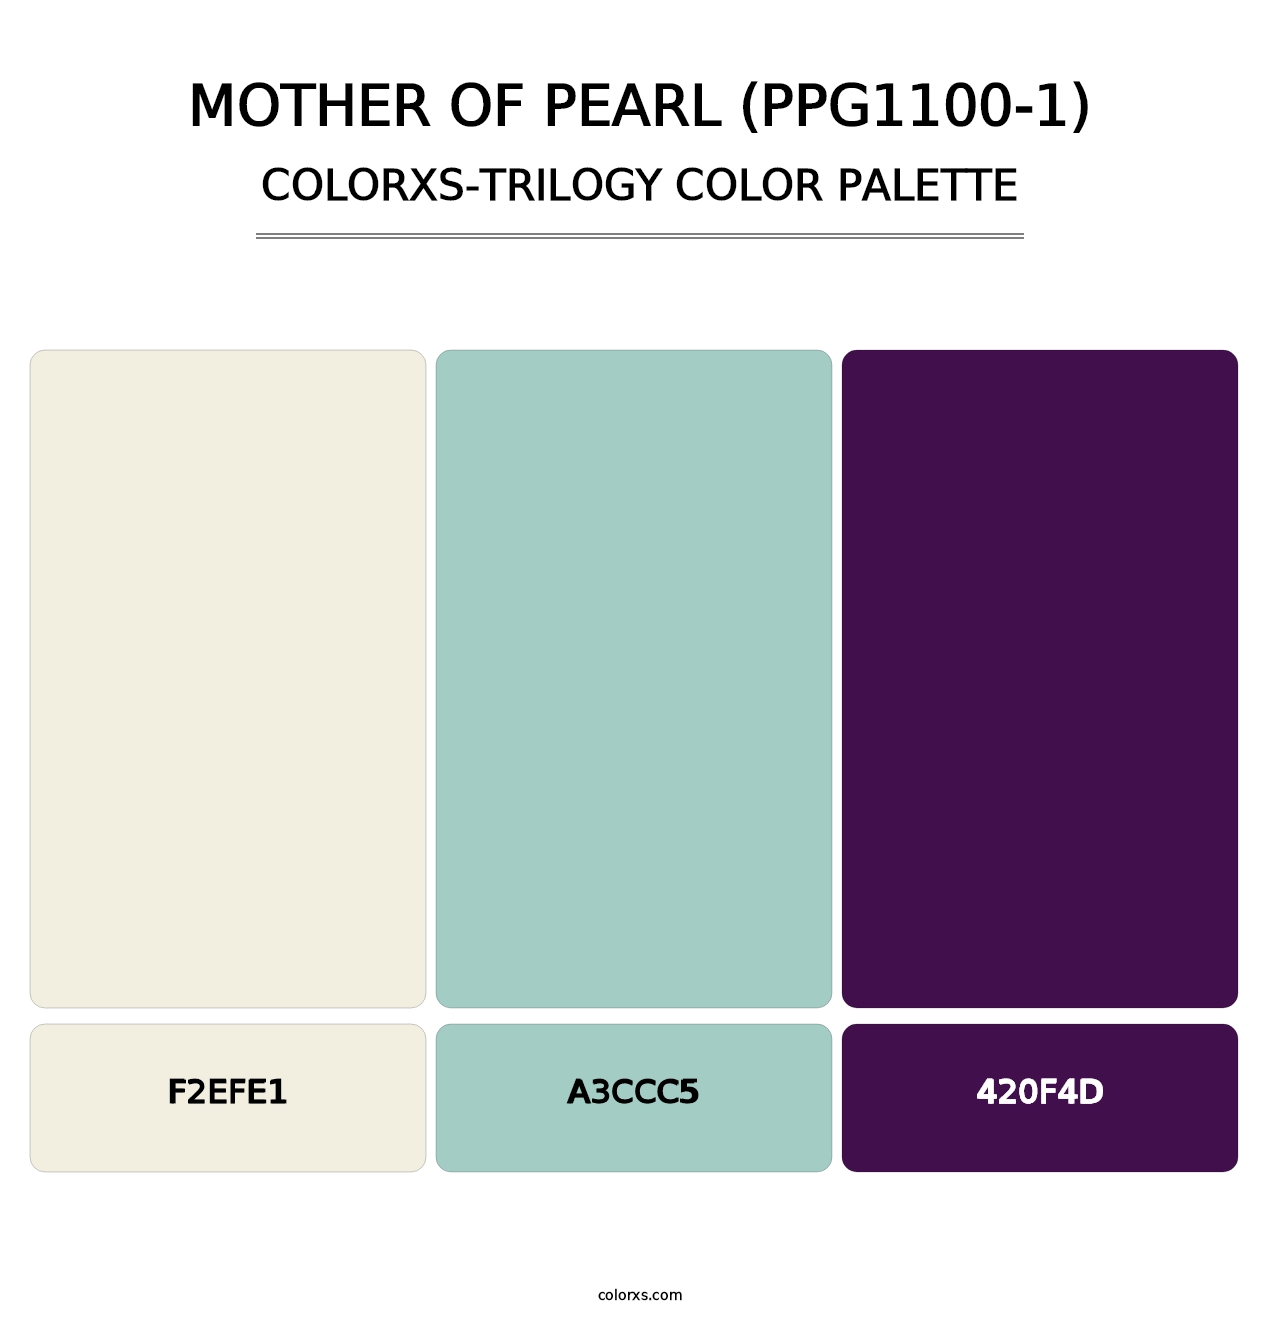 Mother Of Pearl (PPG1100-1) - Colorxs Trilogy Palette